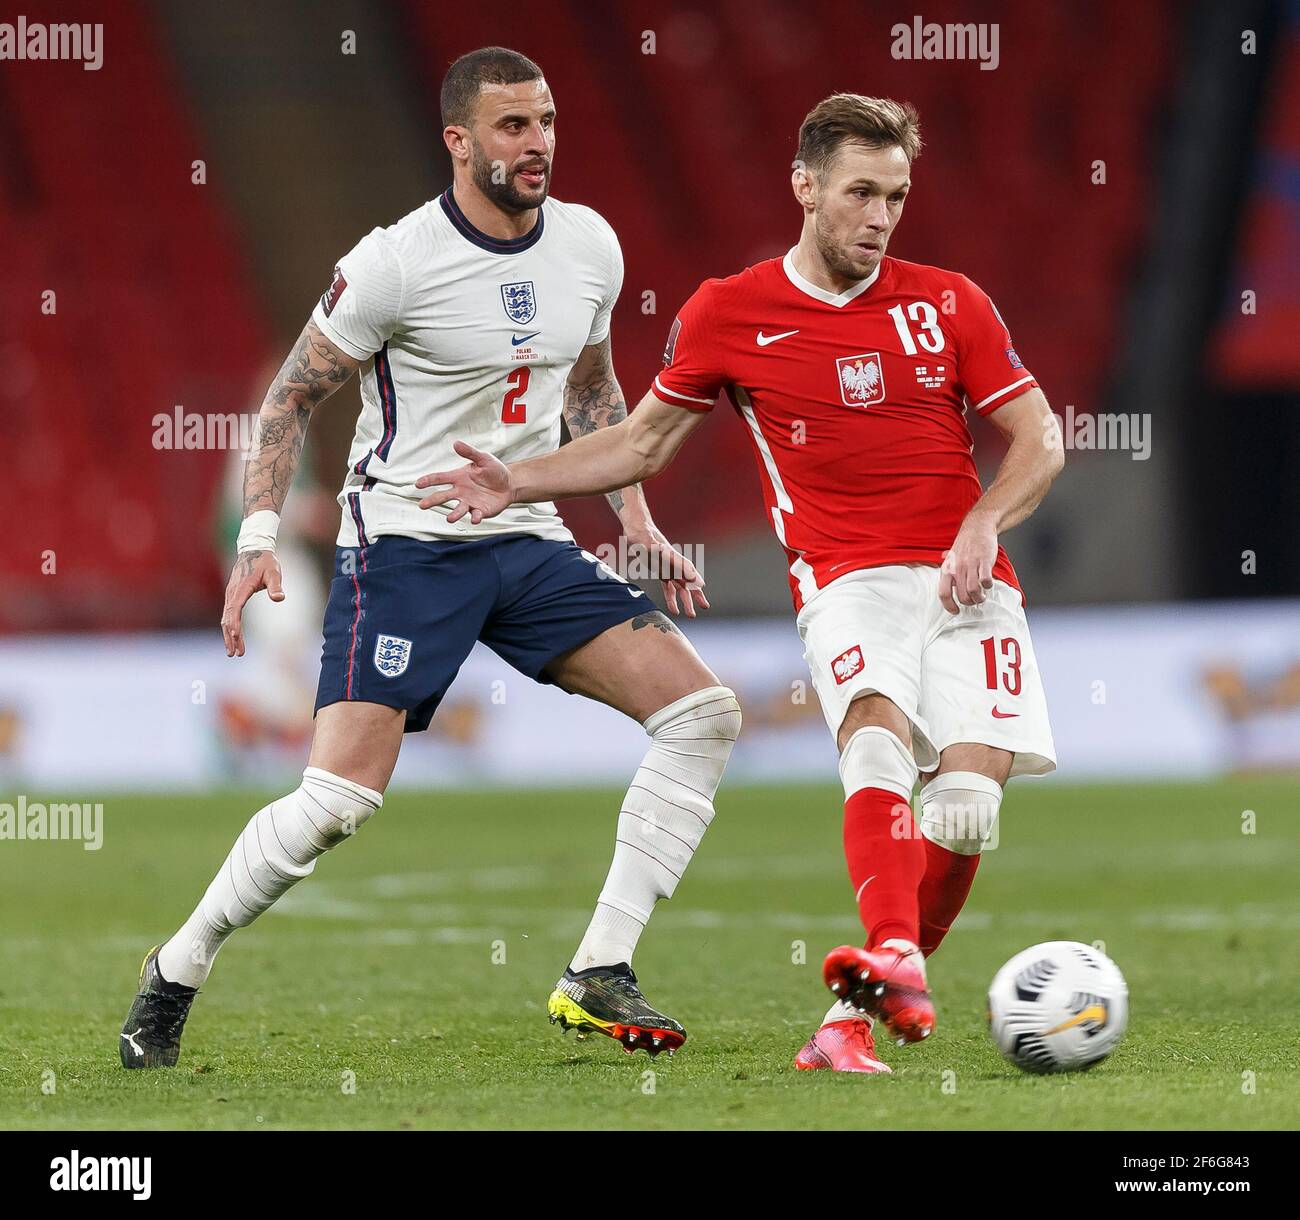 London, UK. 31st Mar, 2021. Kyle Walker of England and Maciej Rybus of Poland during the FIFA World Cup 2022 Qualifying Group I match between England and Poland at Wembley Stadium on March 31st 2021 in London, England. (Photo by Daniel Chesterton/phcimages.com) Credit: PHC Images/Alamy Live News Stock Photo